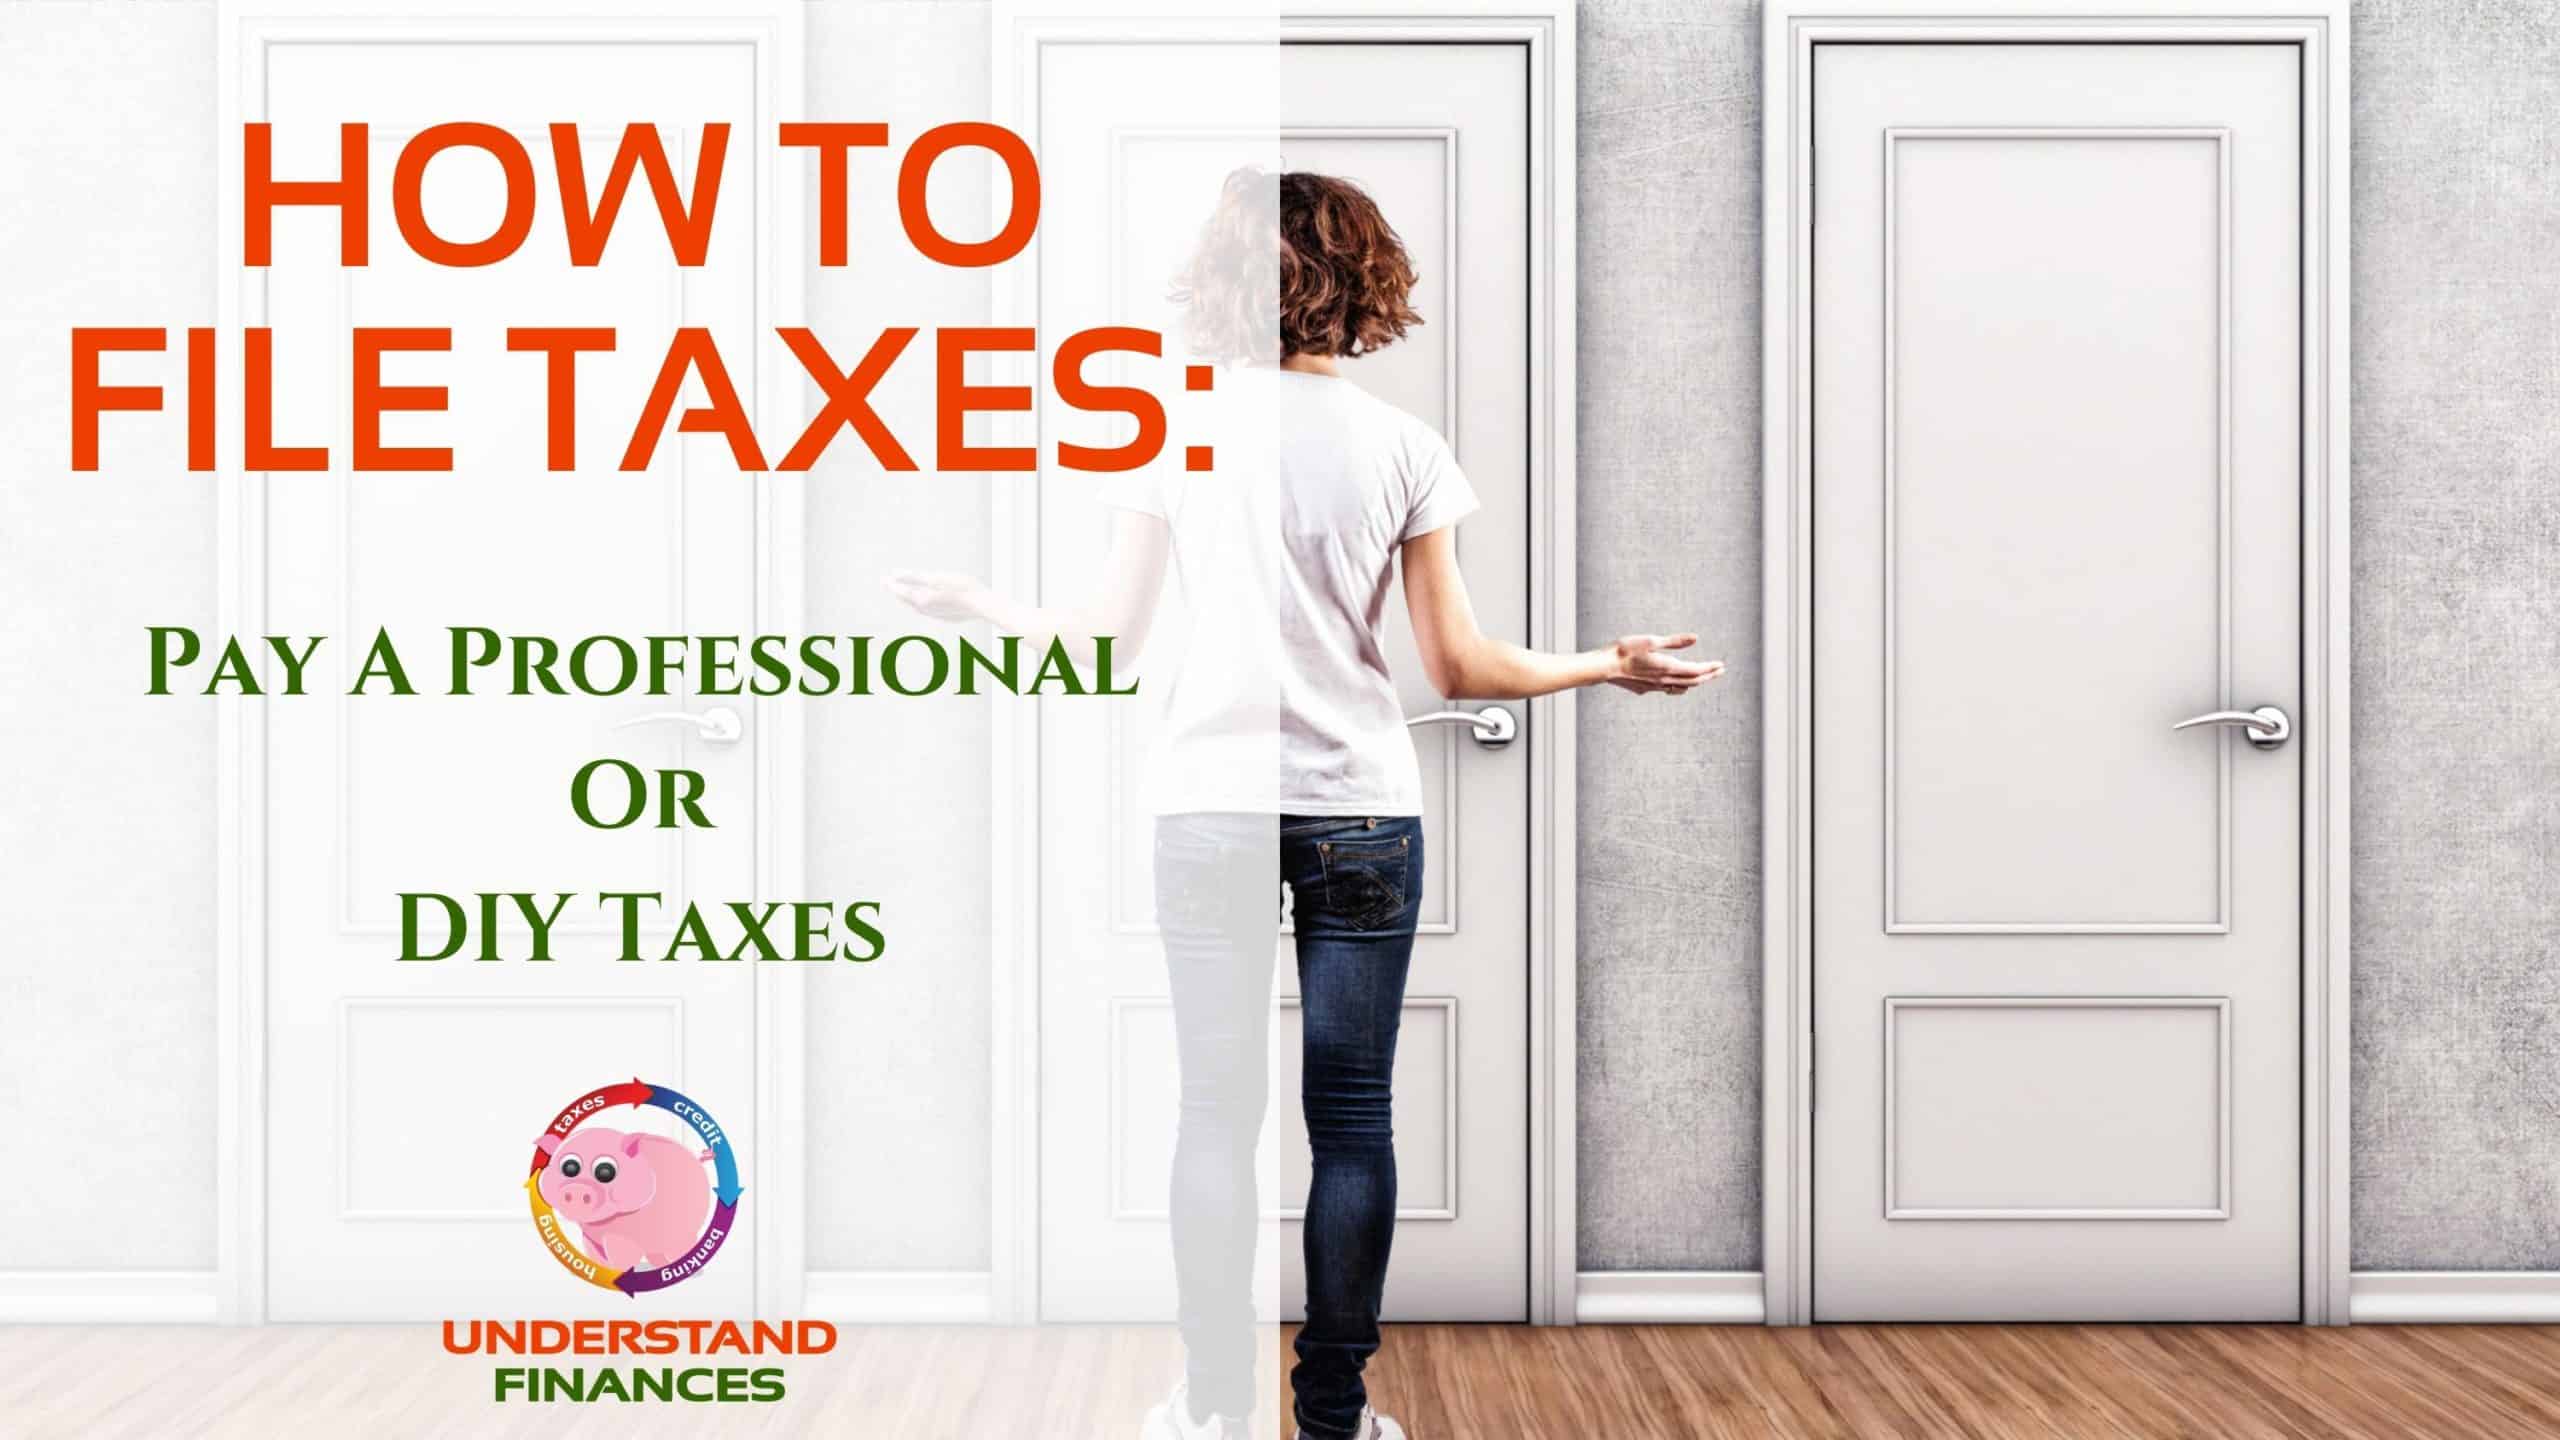 How To File Taxes: Pay A Professional Or DIY Taxes